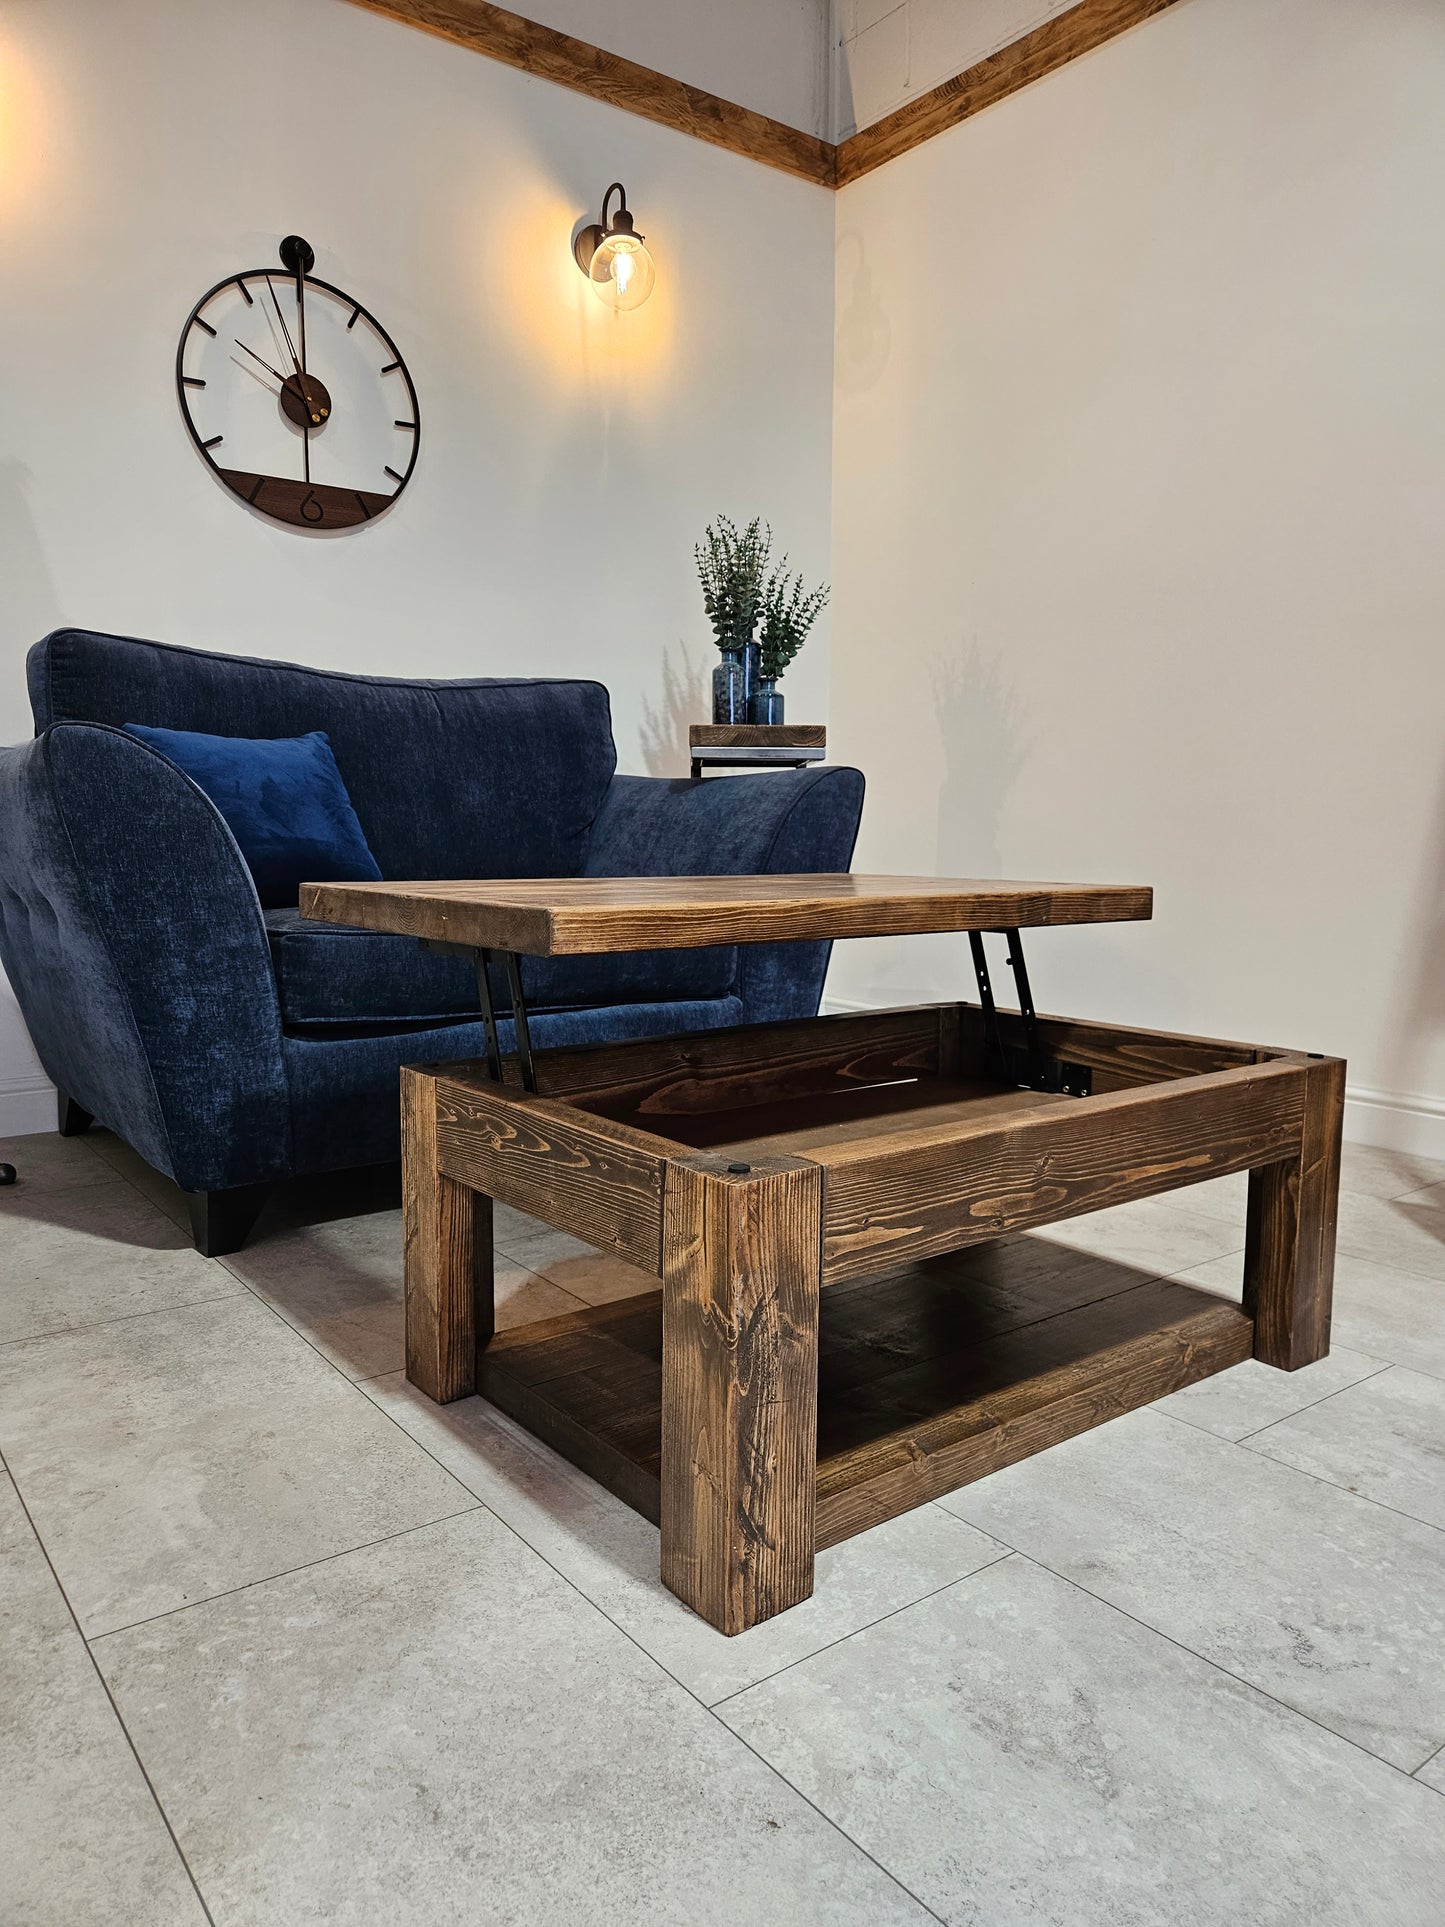 Cantilever coffee table with storage